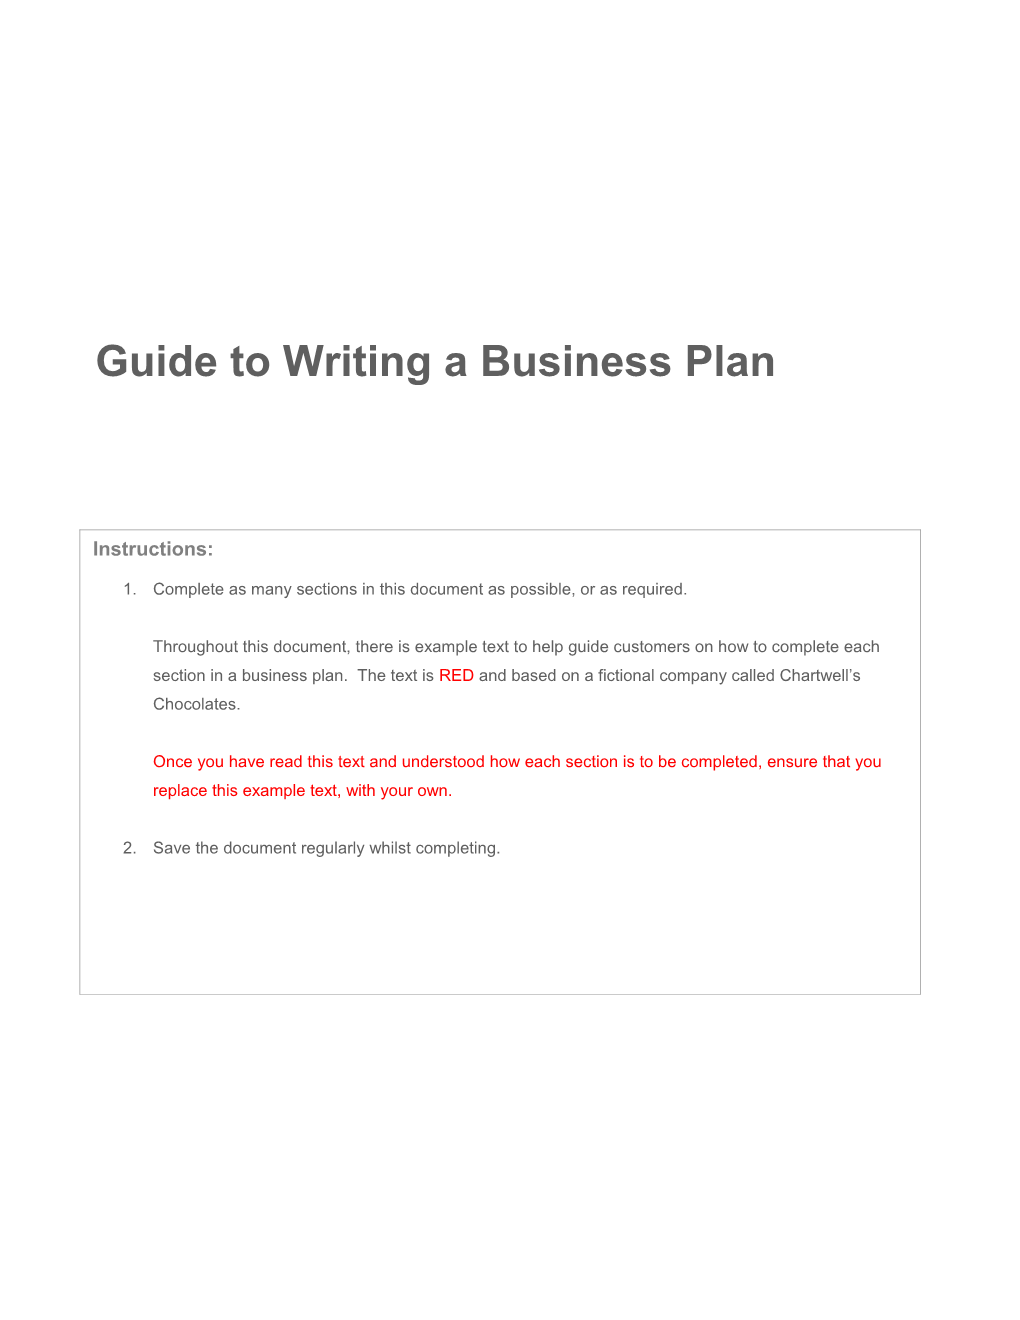 Guide to Writing a Business Plan